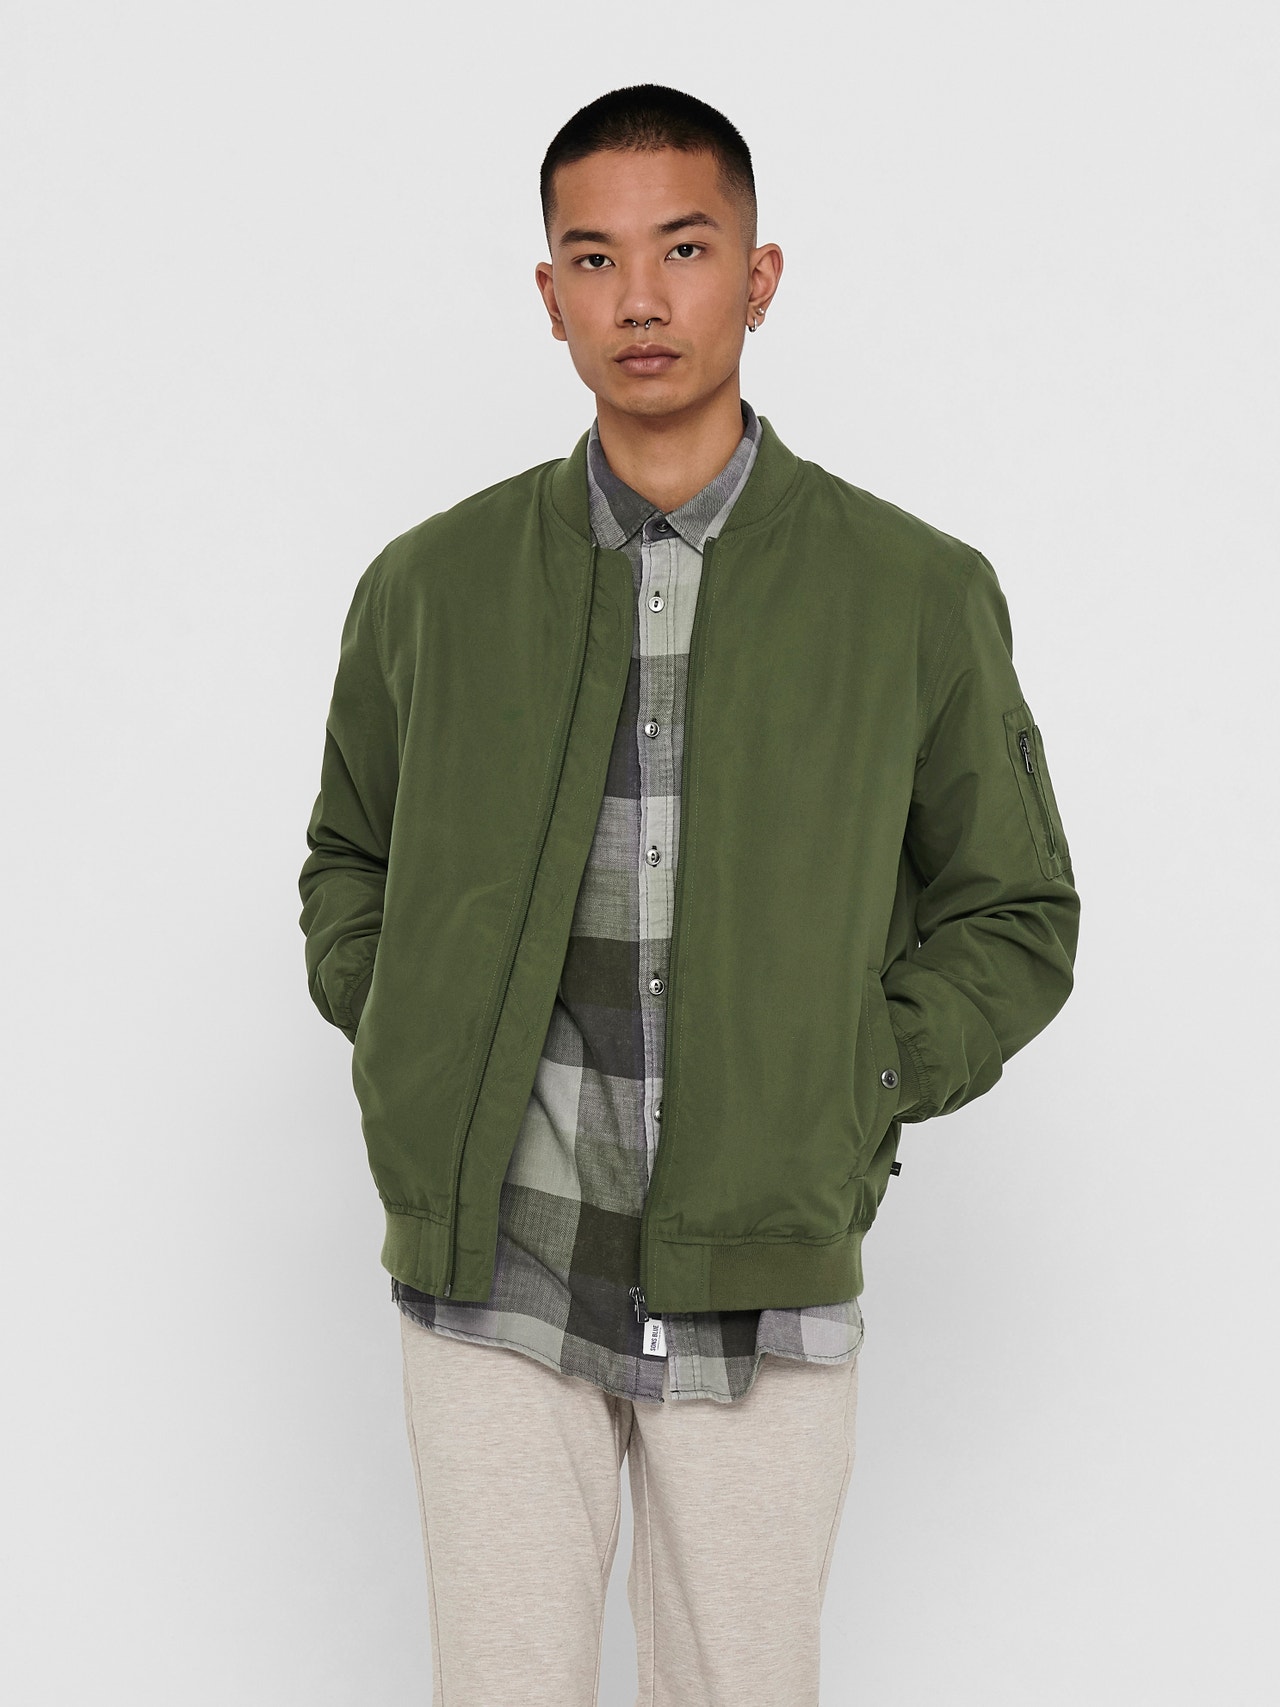 ONLY & SONS Elasticated cuffs Jacket -Olive Night - 22015866